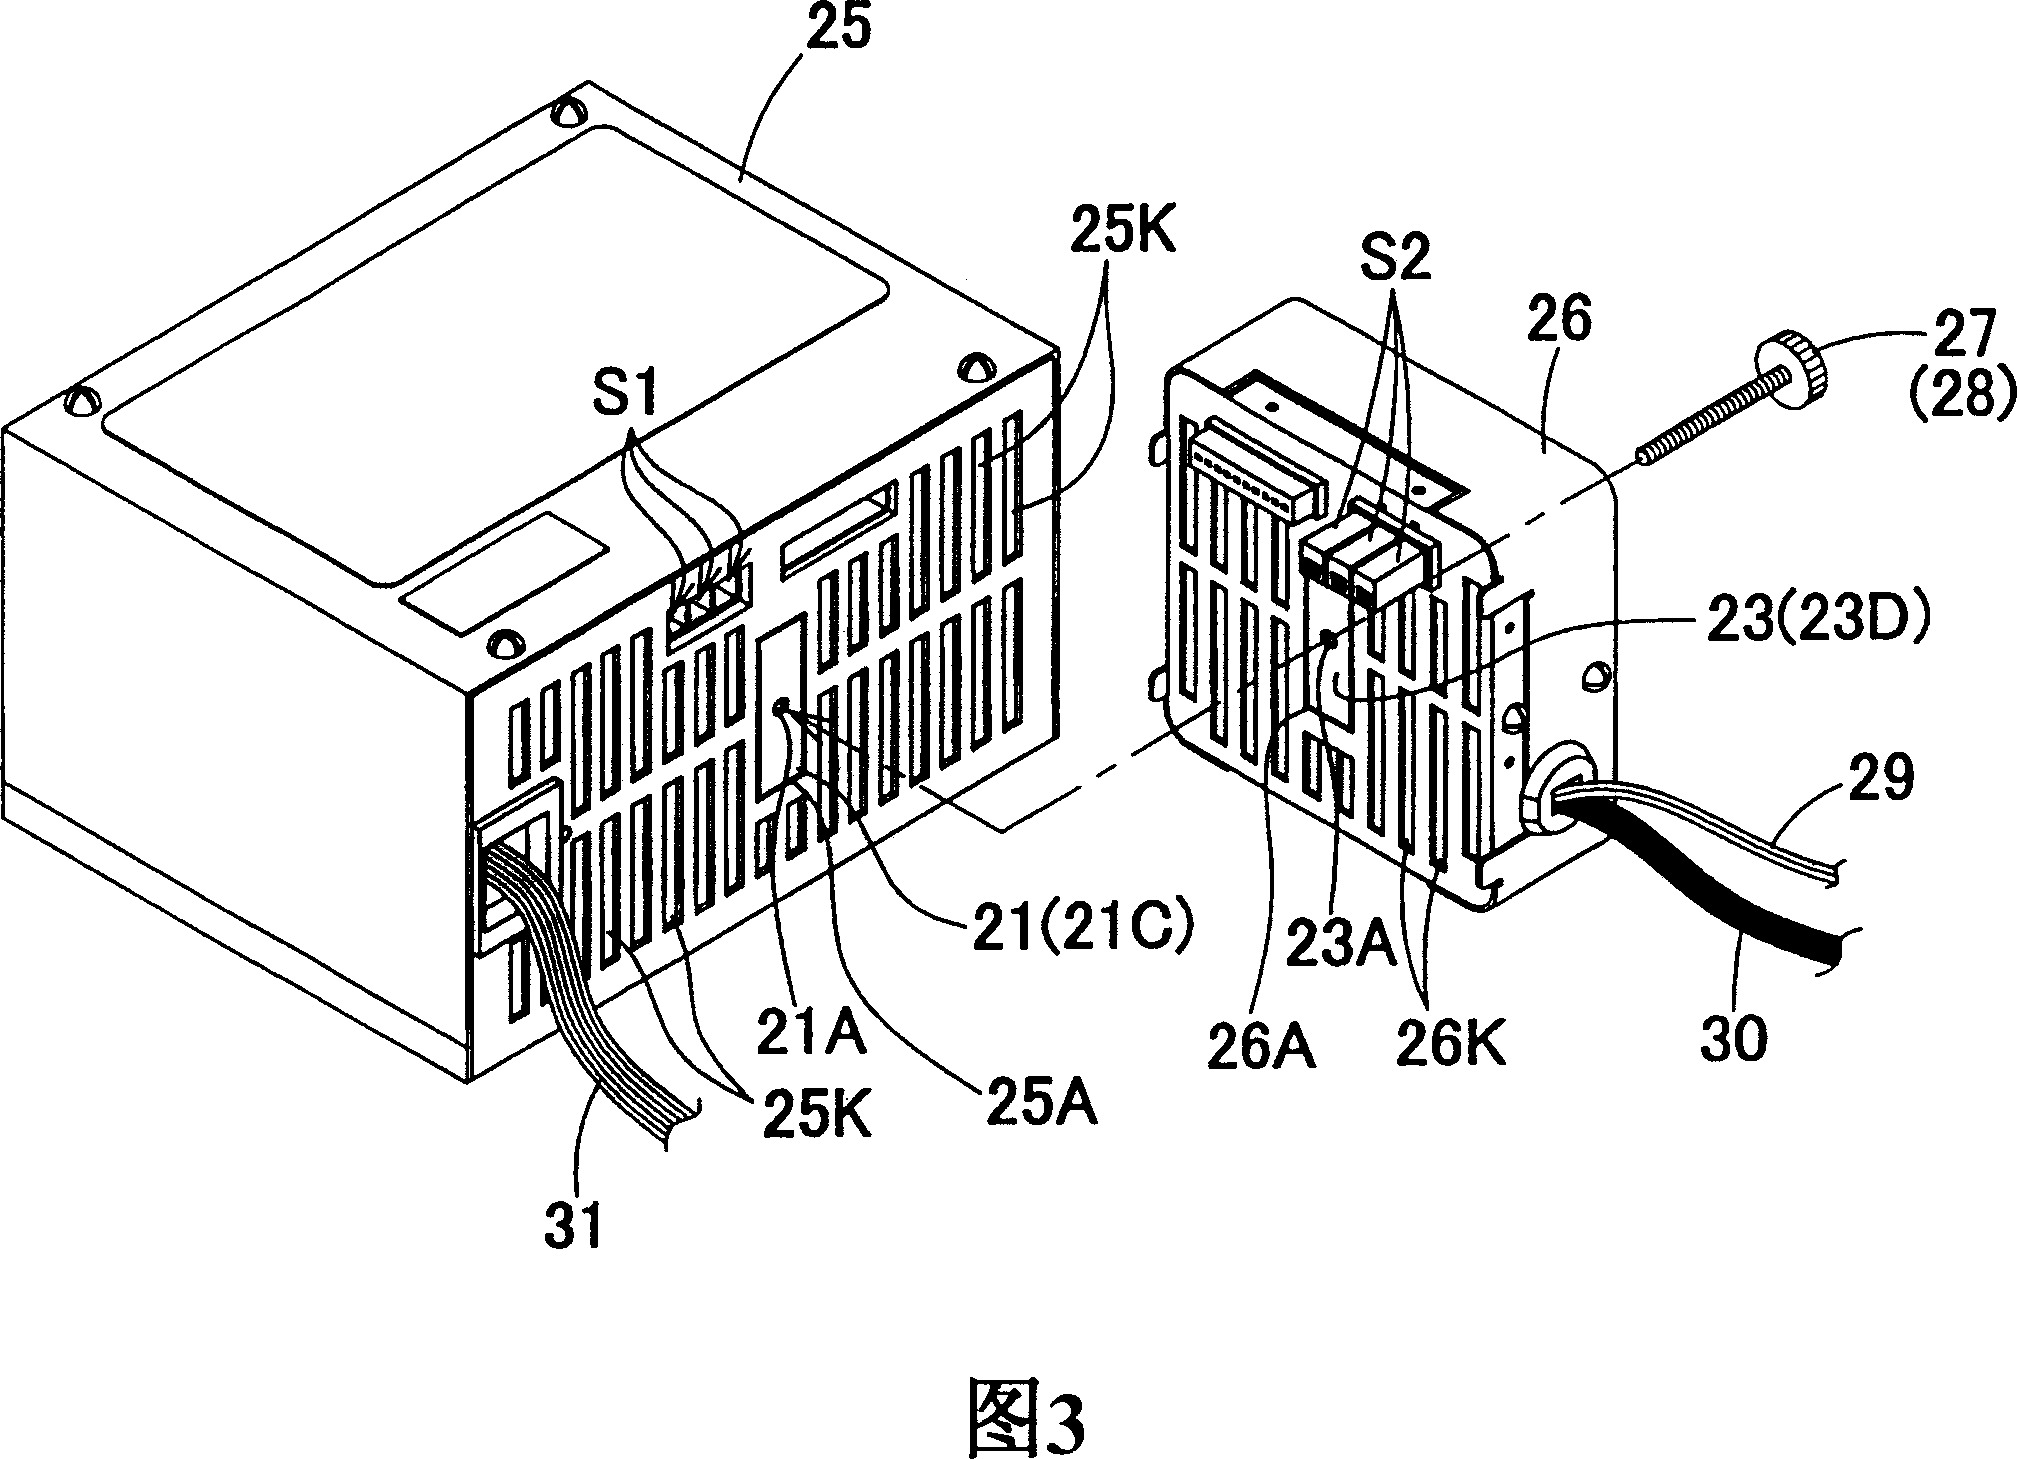 Power source device